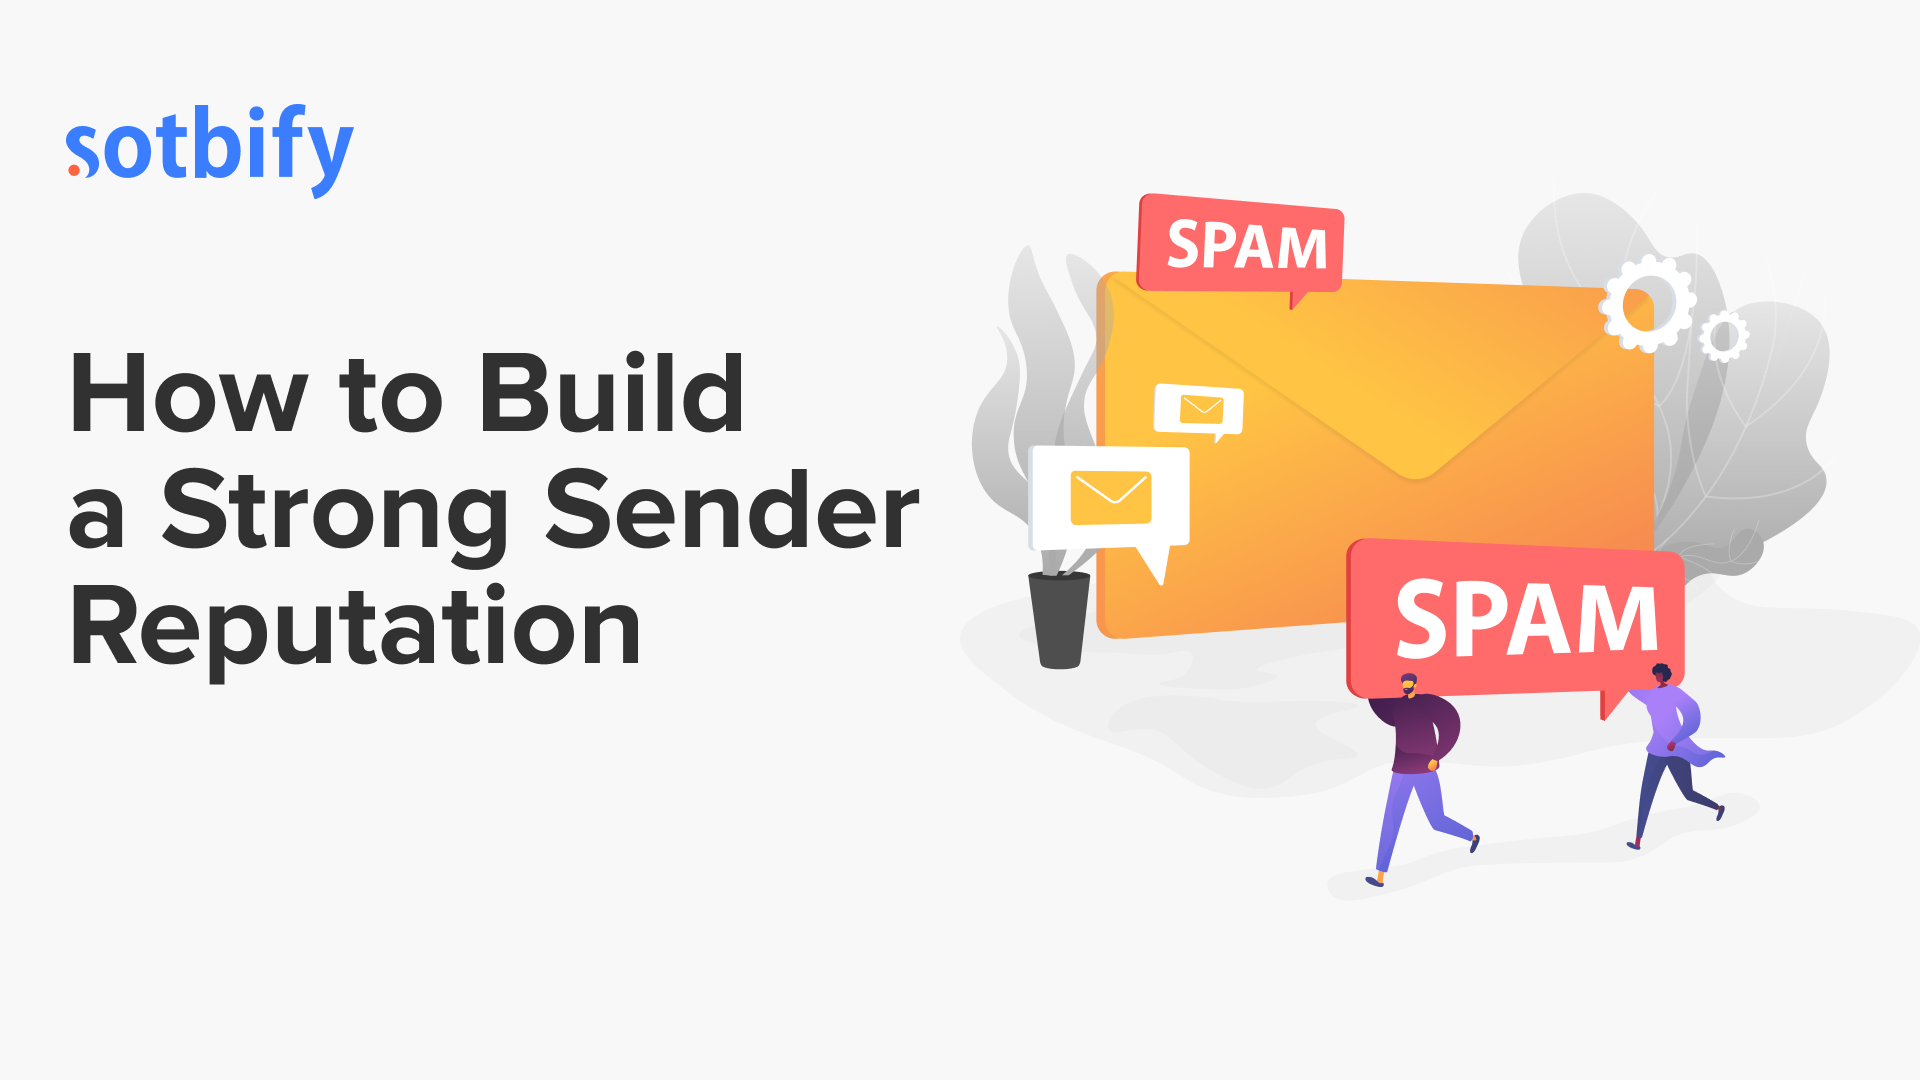 How to Build a Strong Sender Reputation